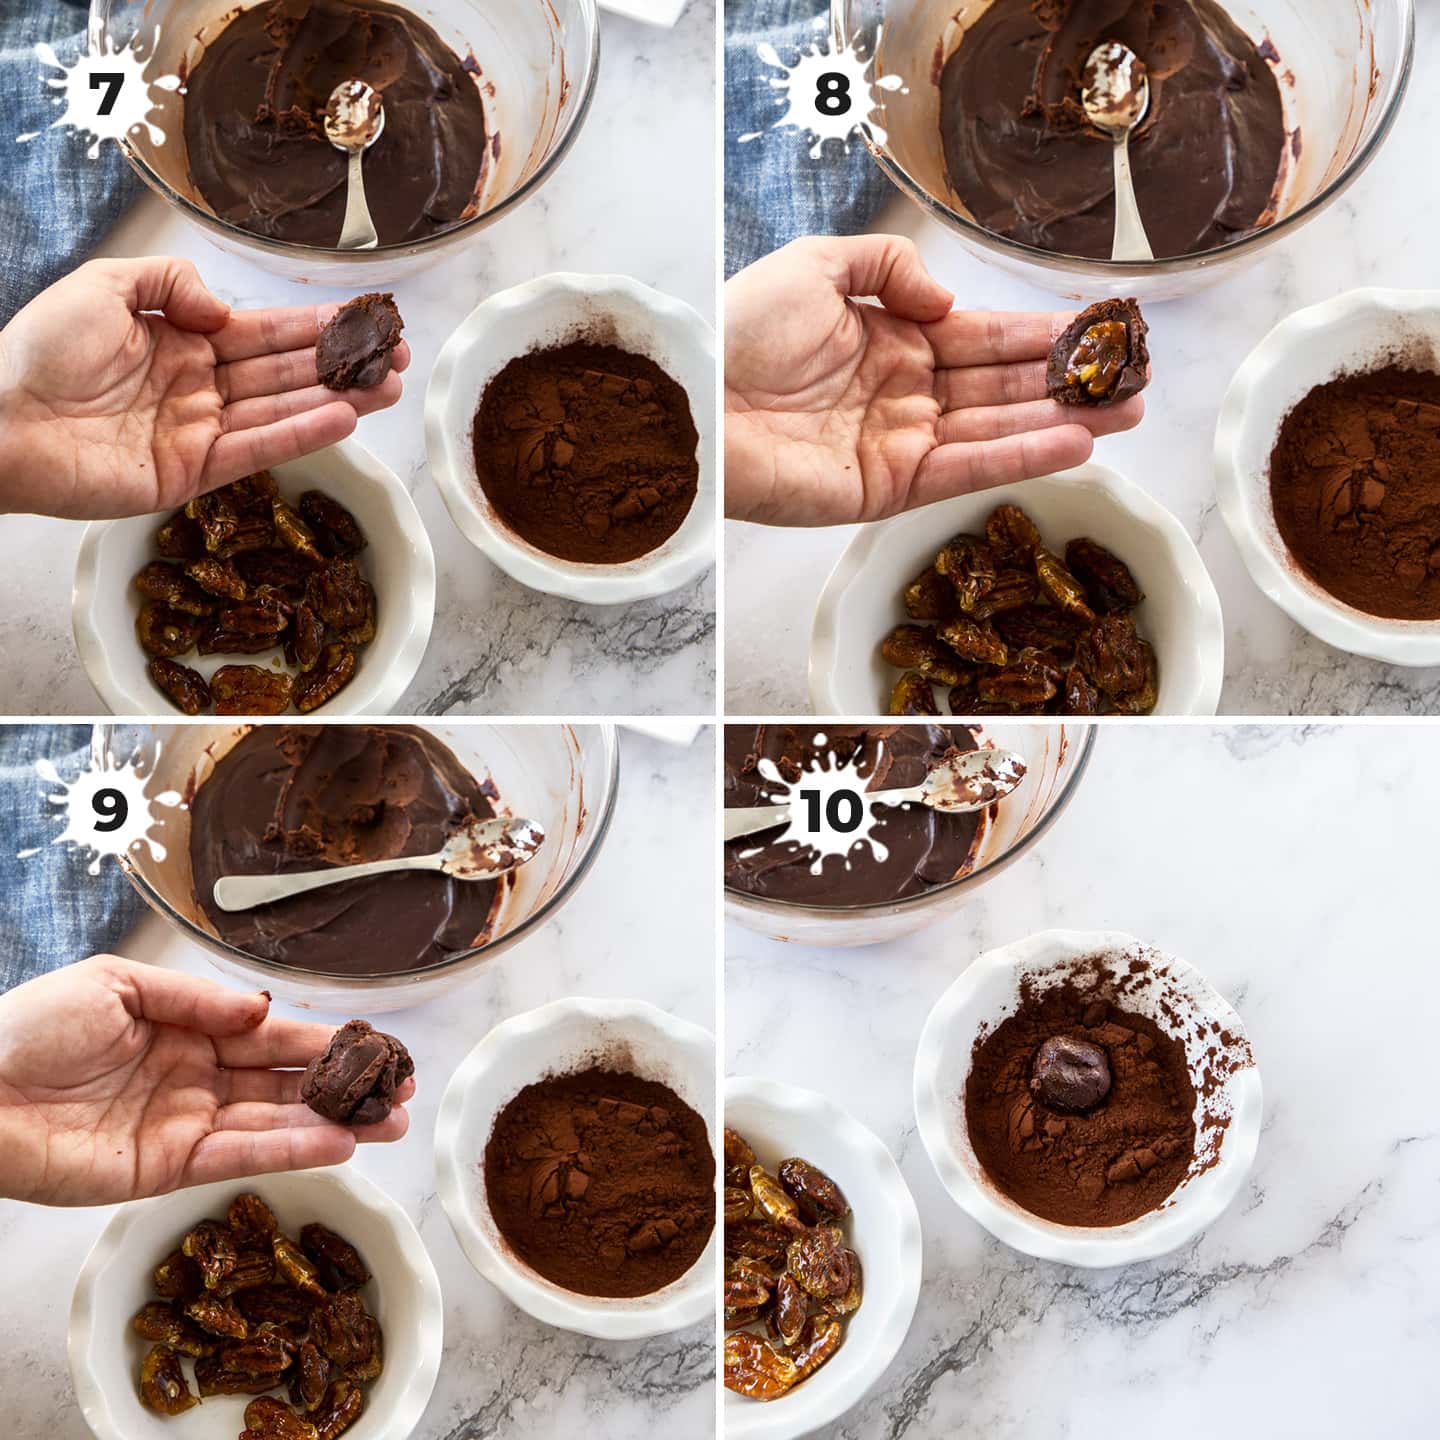 4 images showing a hand assembling a chocolate truffle